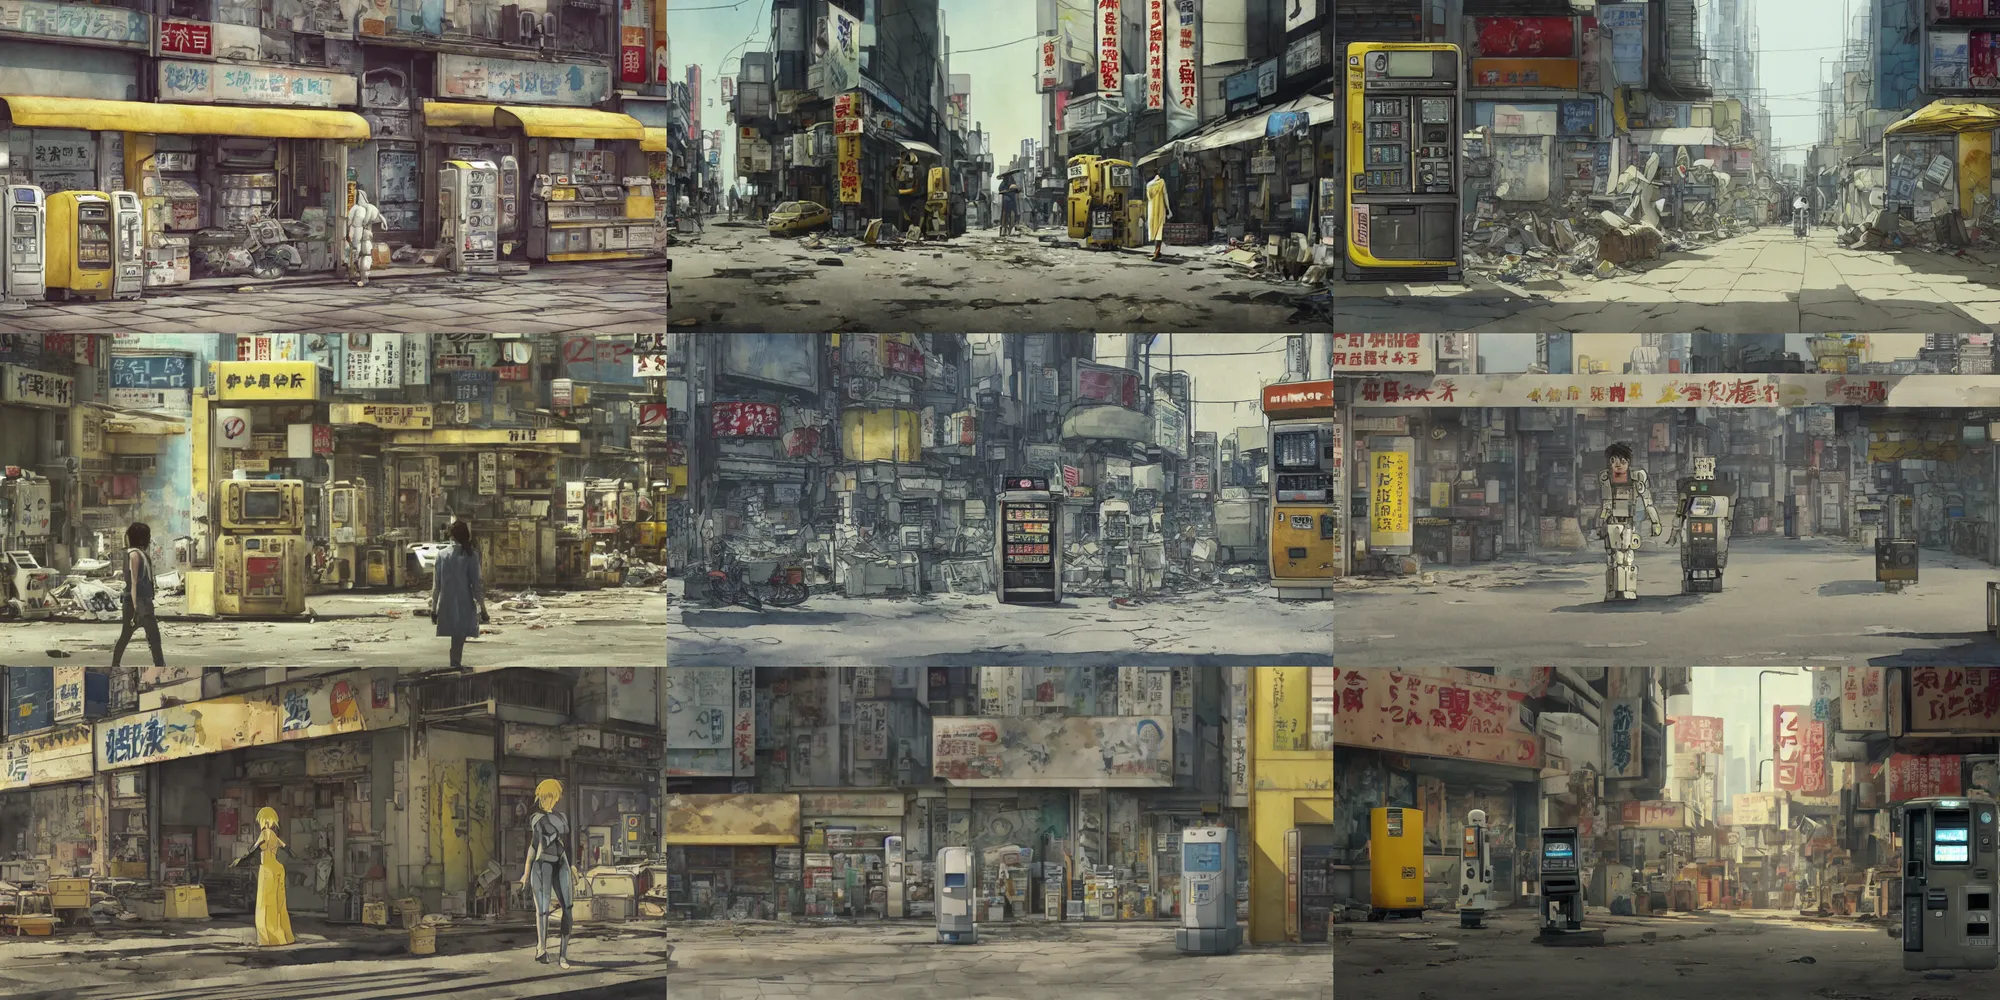 Prompt: incredible wide screenshot, simple watercolor, paper texture, water color paper, ghost in the shell movie scene, distant shot of box robot walking vending machine, yellow striped awnings in deserted dusty shinjuku junk town, old pawn shop, bright sun bleached ground , vending machine robot monster lurks in the background, animatronic, air conditioners, ducts, vents, pipes, black smoke, pale beige sky, junk tv, texture, strange, impossible, fur, spines, mouth, pipe brain, shell, brown mud, dust, bored expression, overhead wires, telephone pole, dusty, dry, pencil marks, genius party,shinjuku, koji morimoto, katsuya terada, masamune shirow, tatsuyuki tanaka hd, 4k, remaster, dynamic camera angle, deep 3 point perspective, fish eye, dynamic scene